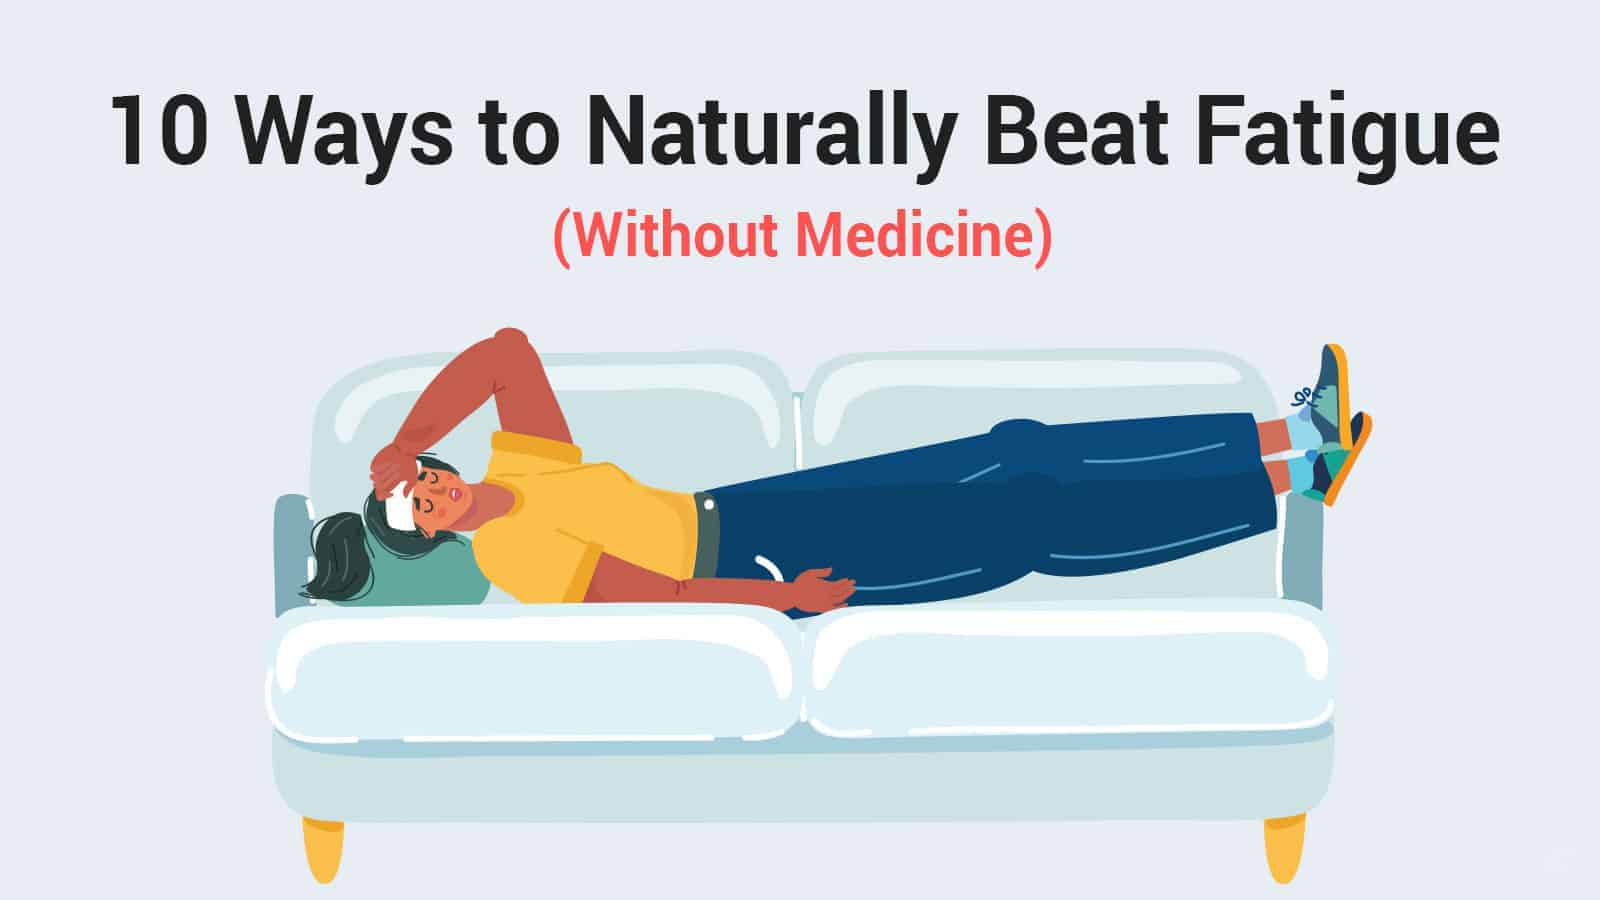 10 Ways to Naturally Beat Fatigue (Without Medicine)